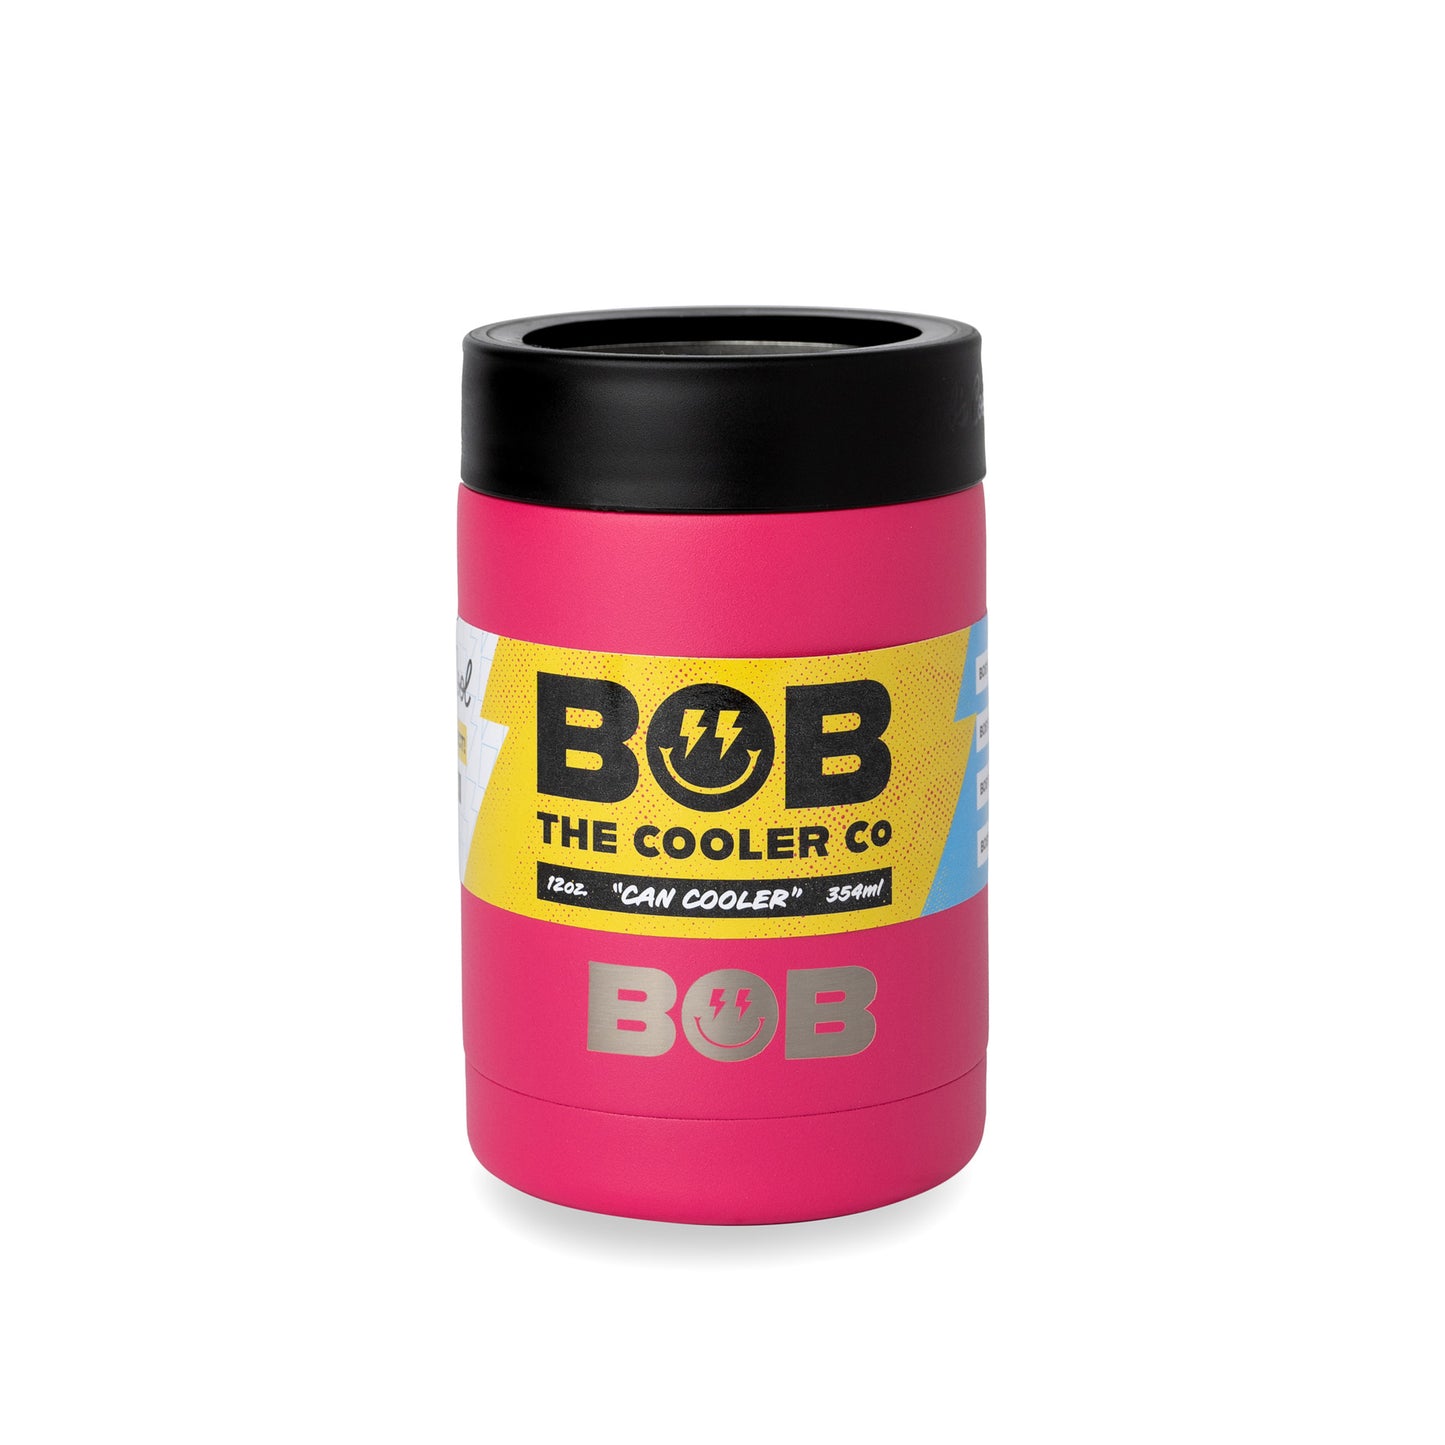 BOBs 12Oz Short Double Wall Vacuum Insulated Can Cooler